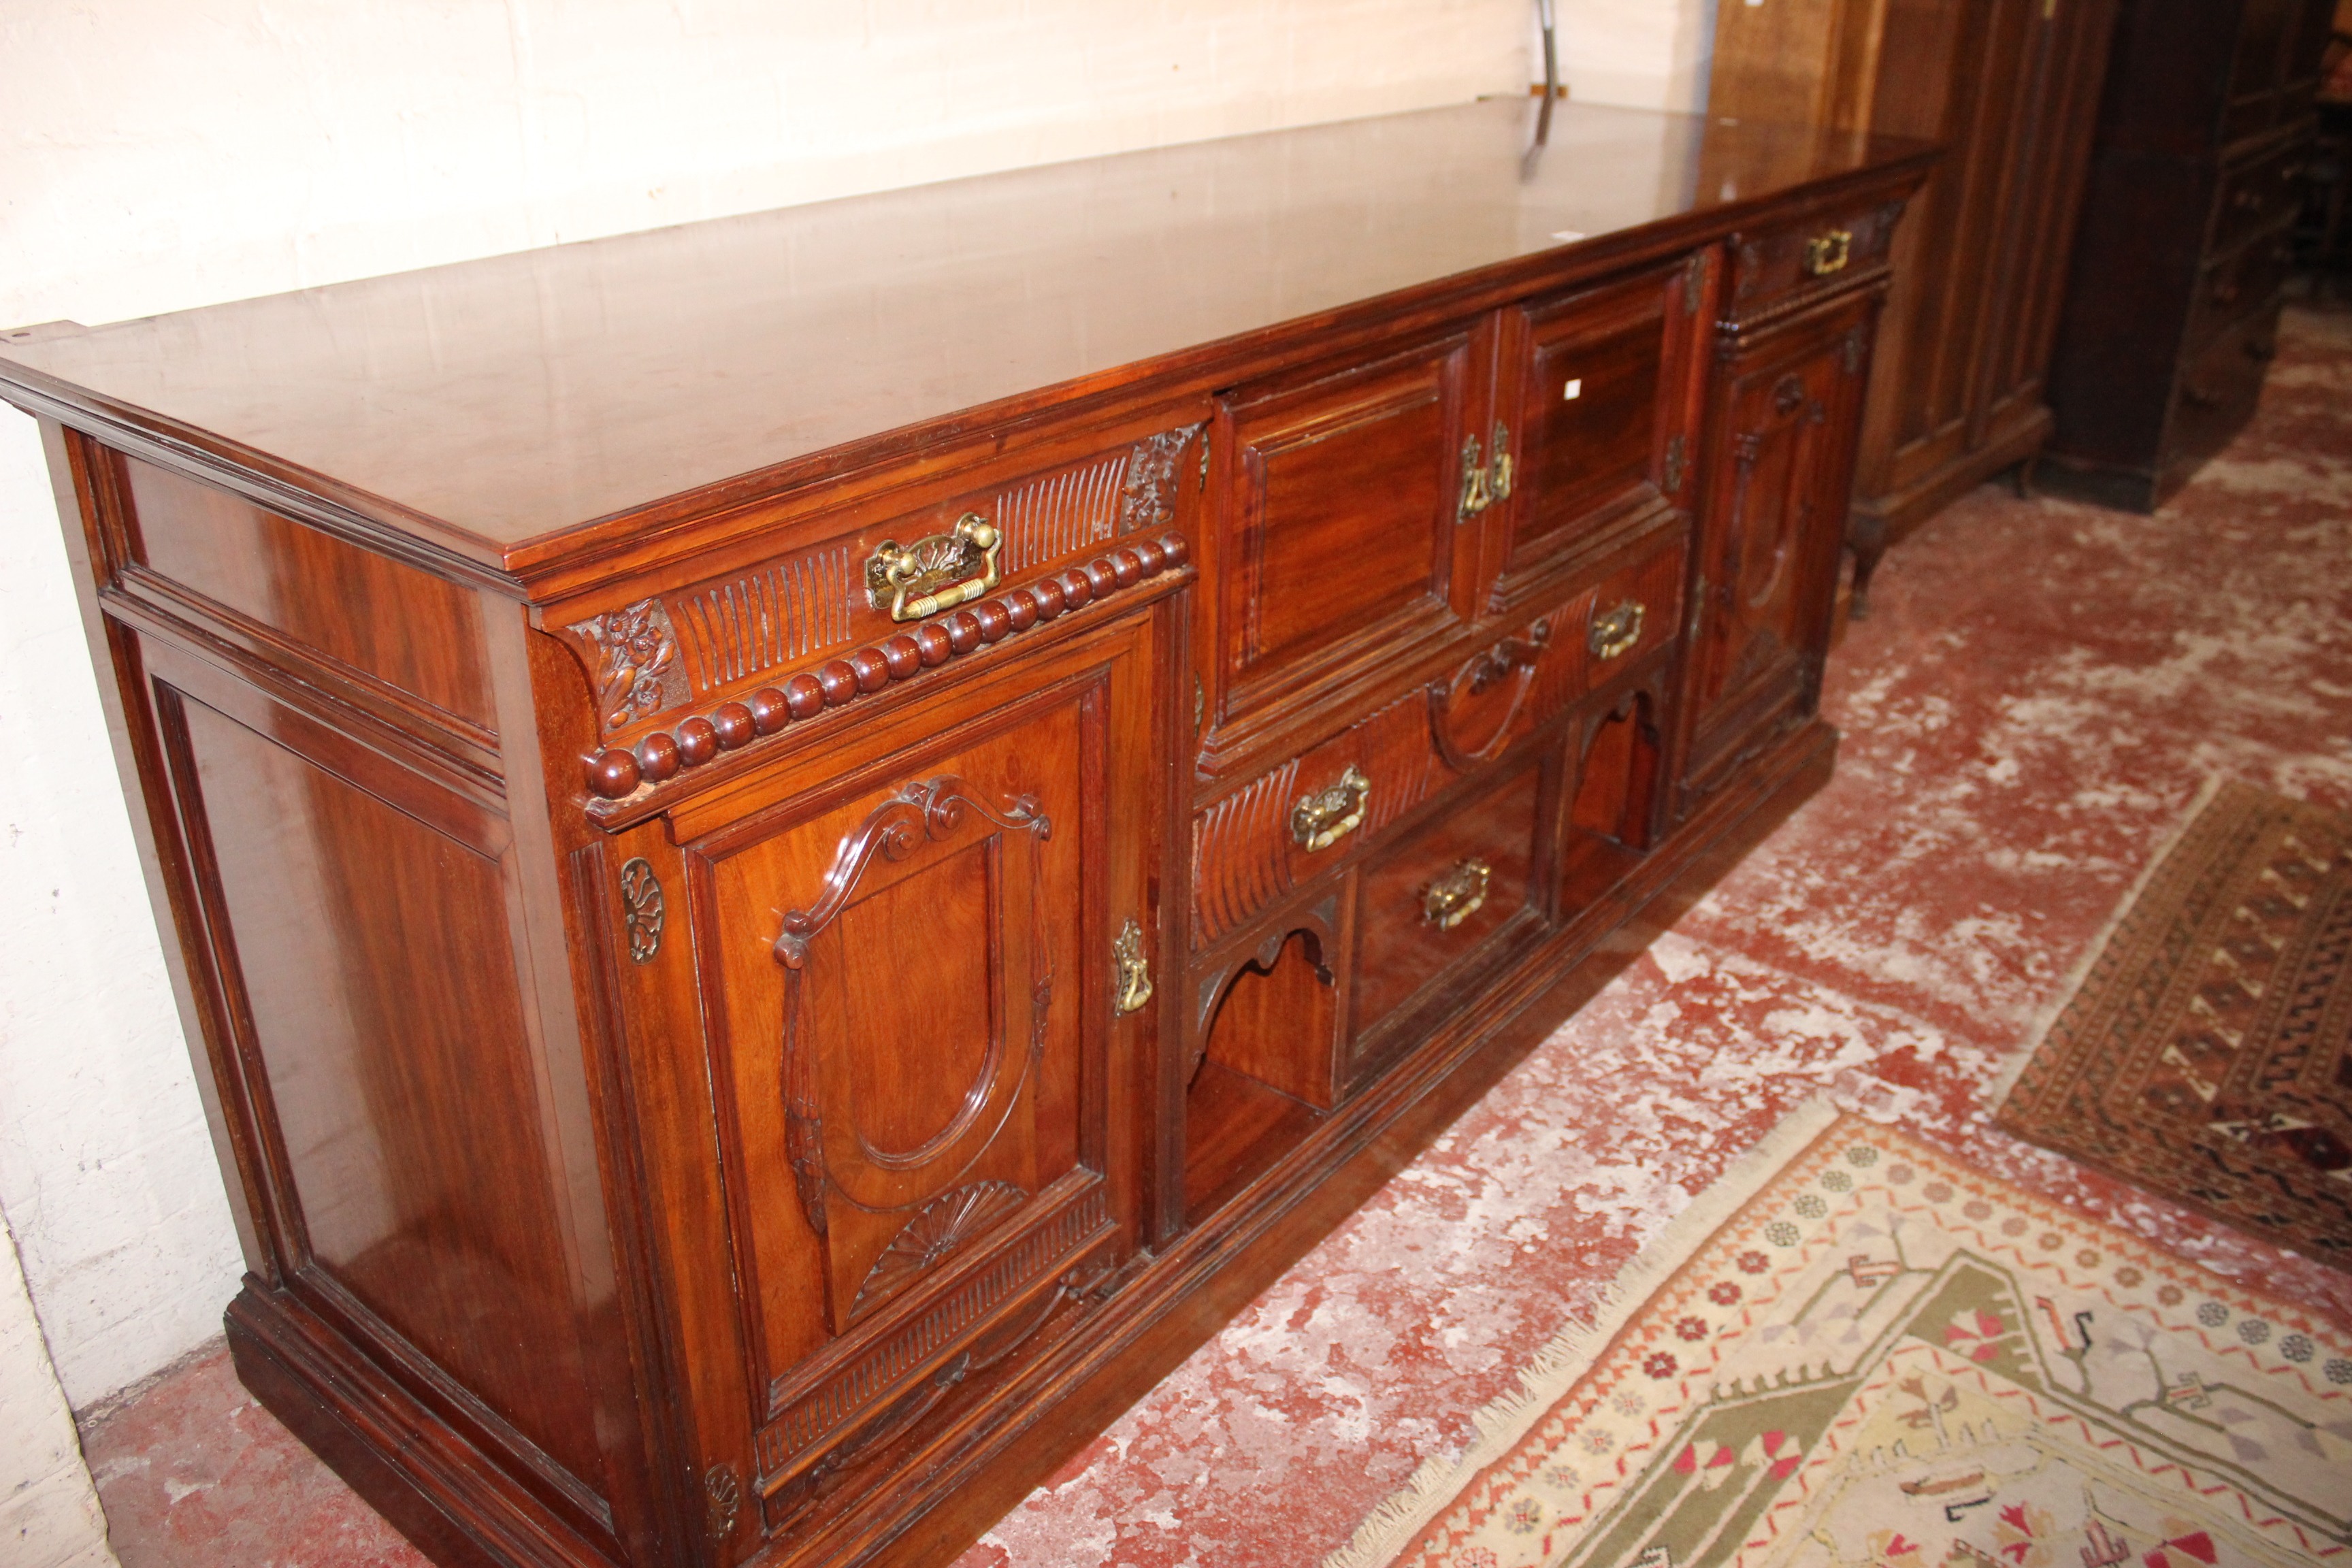 A late Edwardian mahogany mirror back sideboard of large proportions with drawers and cupboards - Image 2 of 4